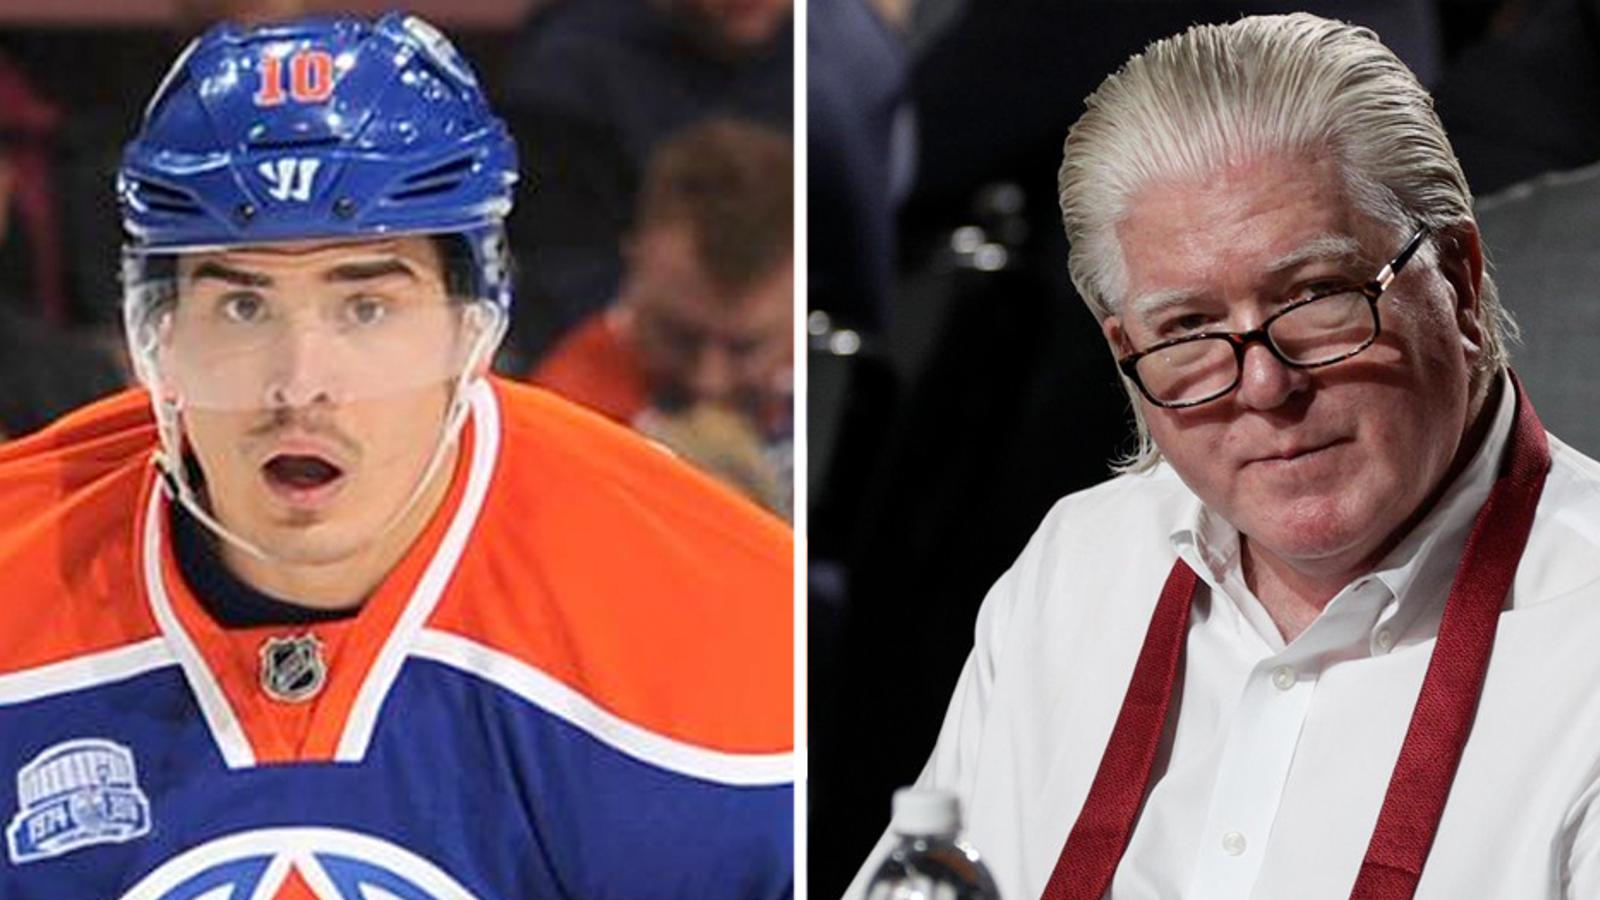 The incredible story of when Nail Yakupov almost fought Brian Burke and a Leafs scout